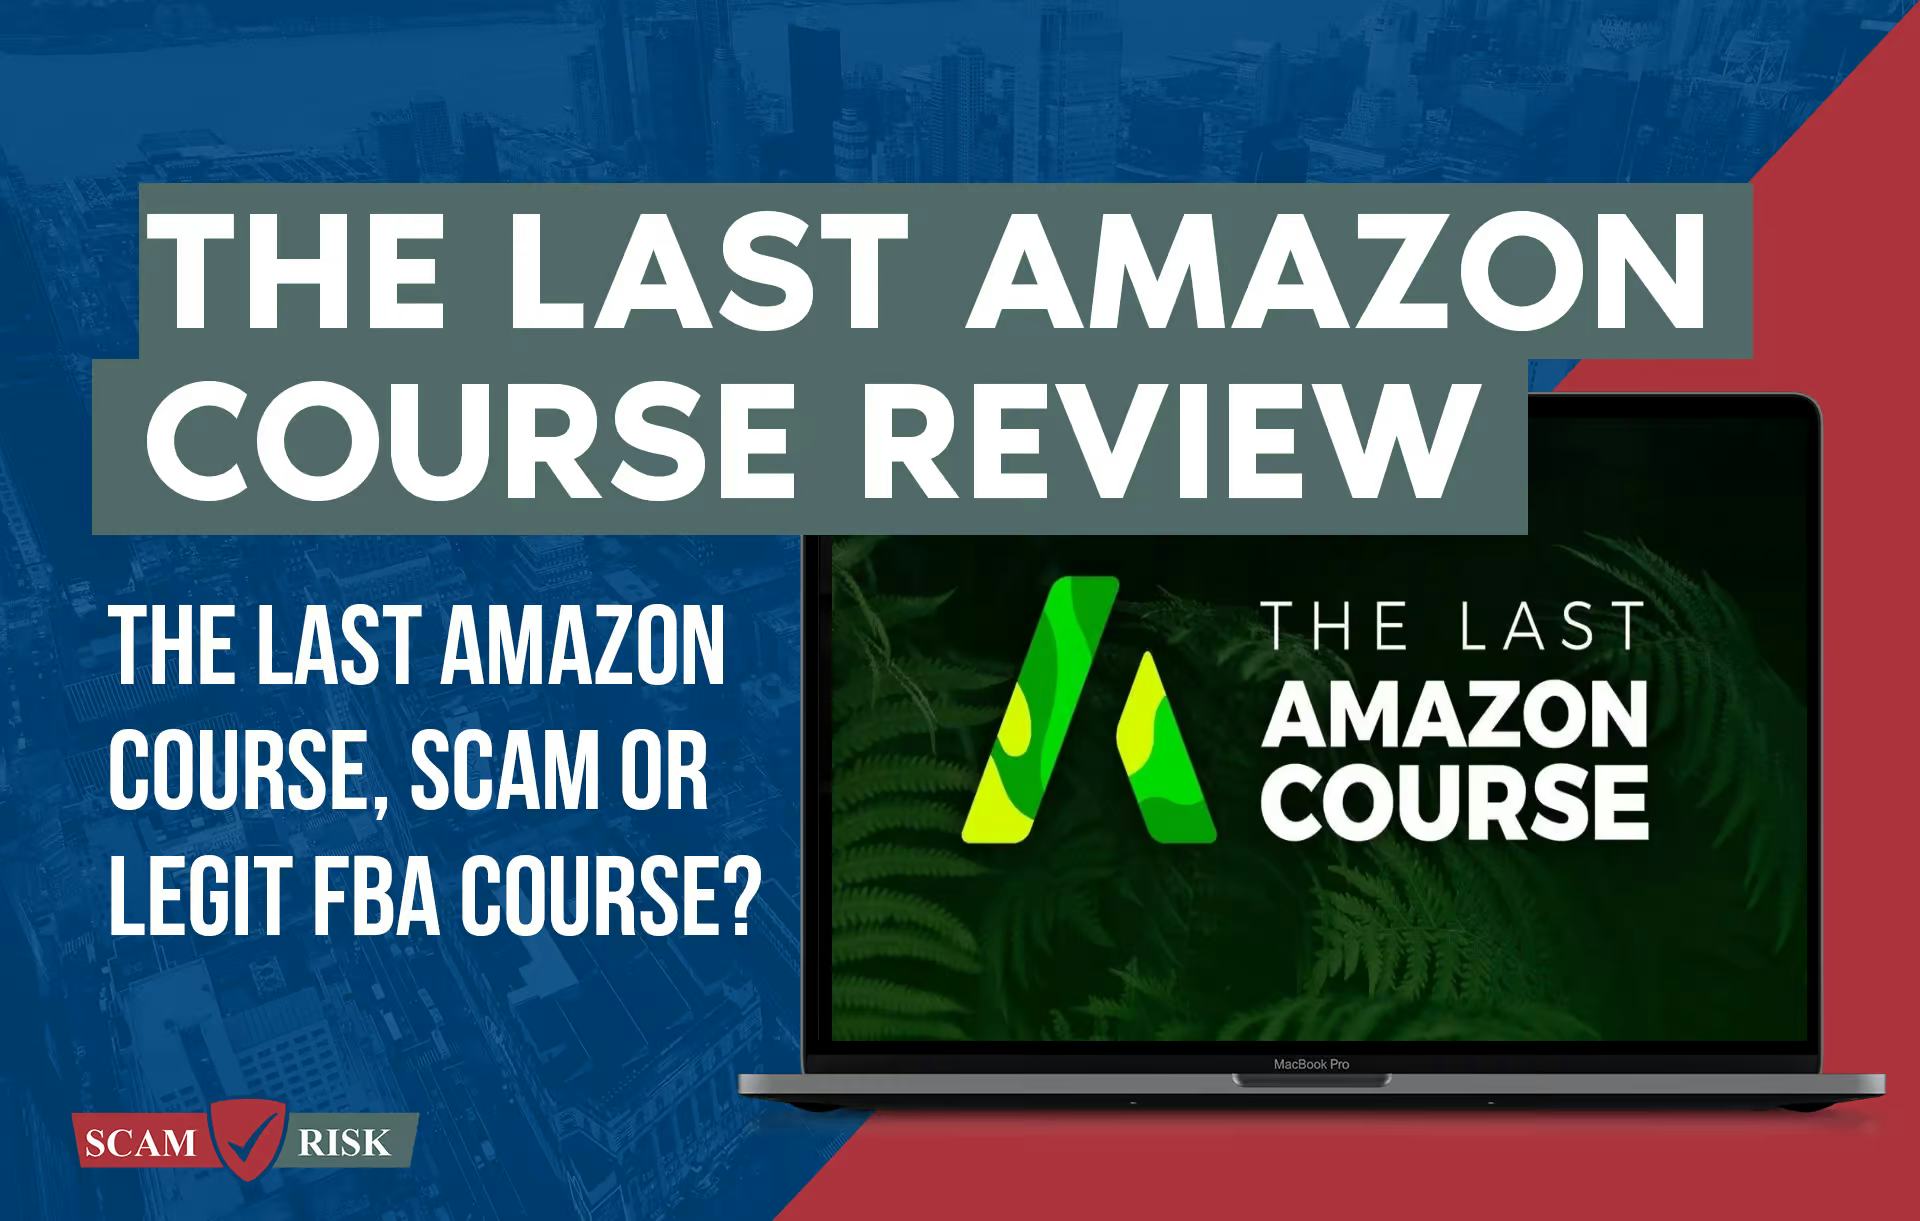 The Last Amazon Course Review